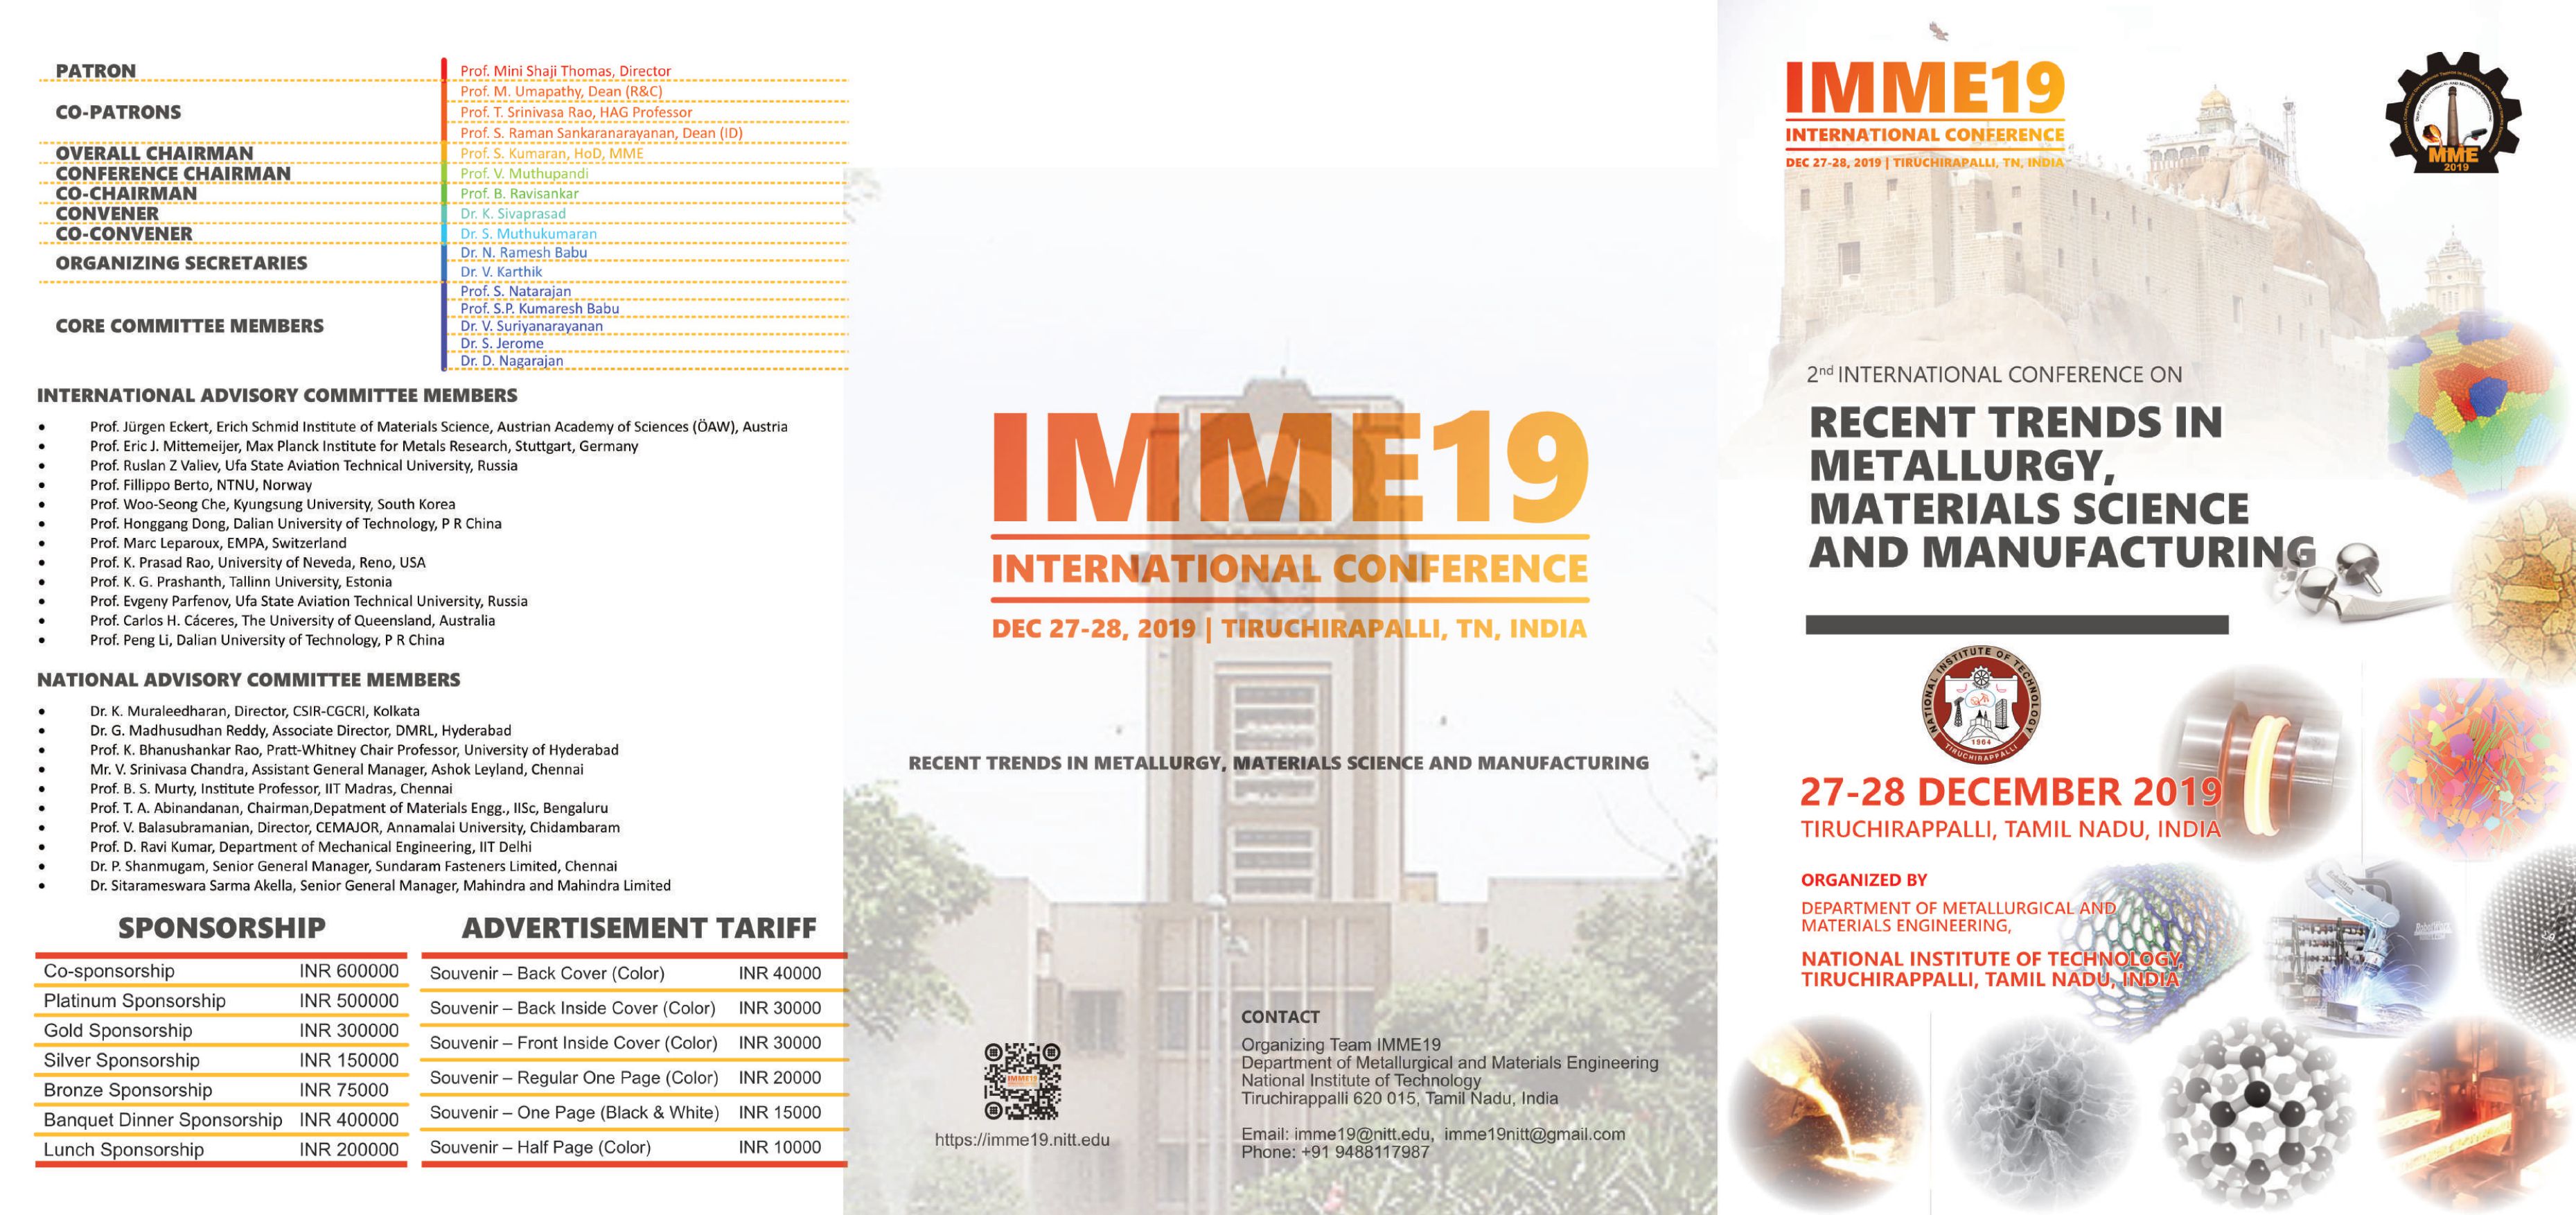 2nd International Conference on Recent Trends in Metallurgy, Materials Science and Manufacturing 2019